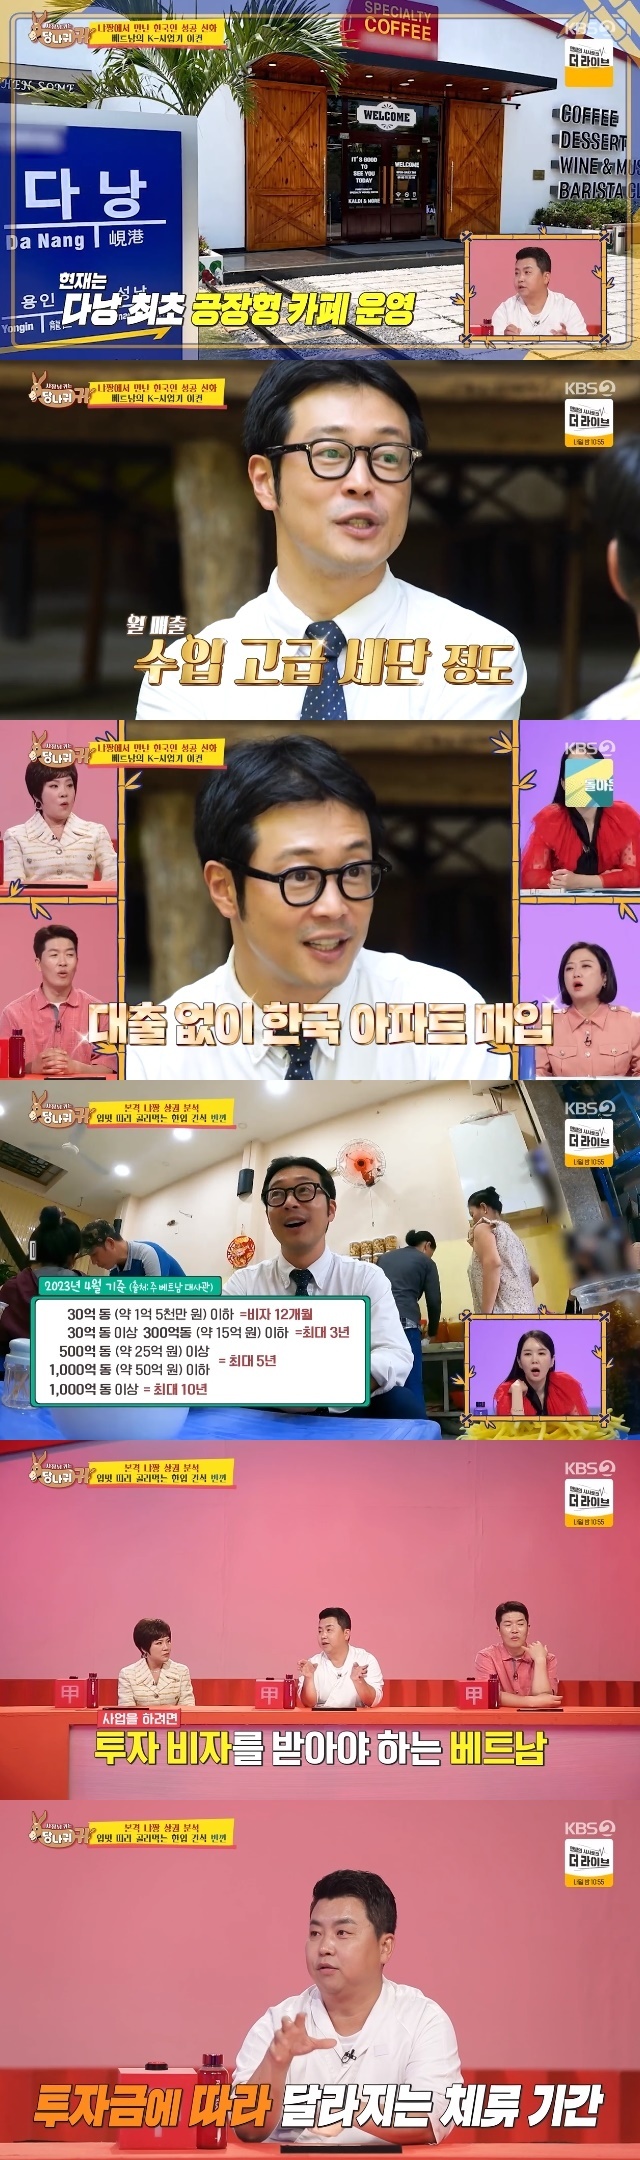 Lee Kyun, who is in business in Vietnam, has revealed the secret to getting a business visa.In the 211th episode of KBS 2TVs entertainment show Boss in the Mirror (hereinafter referred to as Donkey Ears), Lee Kyun, who turned from a singer to an actor and now a successful Businessman, made a surprise appearance.Chef Jeong Ho-young, who visited the hot place Nha-chan in Vietnam with the comedian Kang Jae-joon on the day, said, This is not a joke.If you attach only K, it will be good, he said, meeting a successful Businessman in Vietnam and coming to this far place to hear his story.Since then, the person Jeong Ho-young met was familiar to MCs: Lee Kyun, a former member of the group UP and who starred in the sitcom Hello, Francesca.He was now a six-year-old Businessman who operated nine cafe stores in six major cities in Vietnam before COVID-19 and is now the first Da Nang to operate a factory cafe.He was very successful in the coffee business, and he was surprised when he said, There were only three stores in Da Nang before COVID-19, and when it was best, monthly sales were about to roll a luxury sedan. He also bought an apartment in Korea without a real loan.Lee Kyun confidently told Jeong Ho-young, who wondered about K-foods influence in Vietnam, I dare to say that K works better than any other brand.In Vietnam, tteokbokki, kimbap, and chicken were basic, and stalls, bamboo bread, and hokok were also popular.Lee Kyun then introduced Jeong Ho-young and Kang Jae-joon to some of the must-see restaurants in Nha-chan and gave them various business tips. In the case of a commercial area near the beach, the monthly rent was about $ 3 or $ 4,000, reaching about 5 million won.Lee Kyun said that if you go outside the beach and go into a local neighborhood, the price drops to half of the price.Jeong Ho-young, who received information from Lee Kyun, was asked if the price of real estate in the studio was quite high. The average wage in Vietnam is about 400,000 won per month.Its really expensive, and there are real landlords, he added. Its a system where landlords collect monthly rent.Lee Kyun also revealed how to get the most important business (investment) visa.To spend more than two years in Vietnam, you have to show 30 billion dong (about 1.5 billion won), 50 billion dong (about 2.5 billion won), and 100 billion dong (about 5 billion won) in Vietnamese money, he said, explaining that the duration of the sojourn varies depending on the investment.Kim Hee-chul said, It takes about five years to get five billion won.